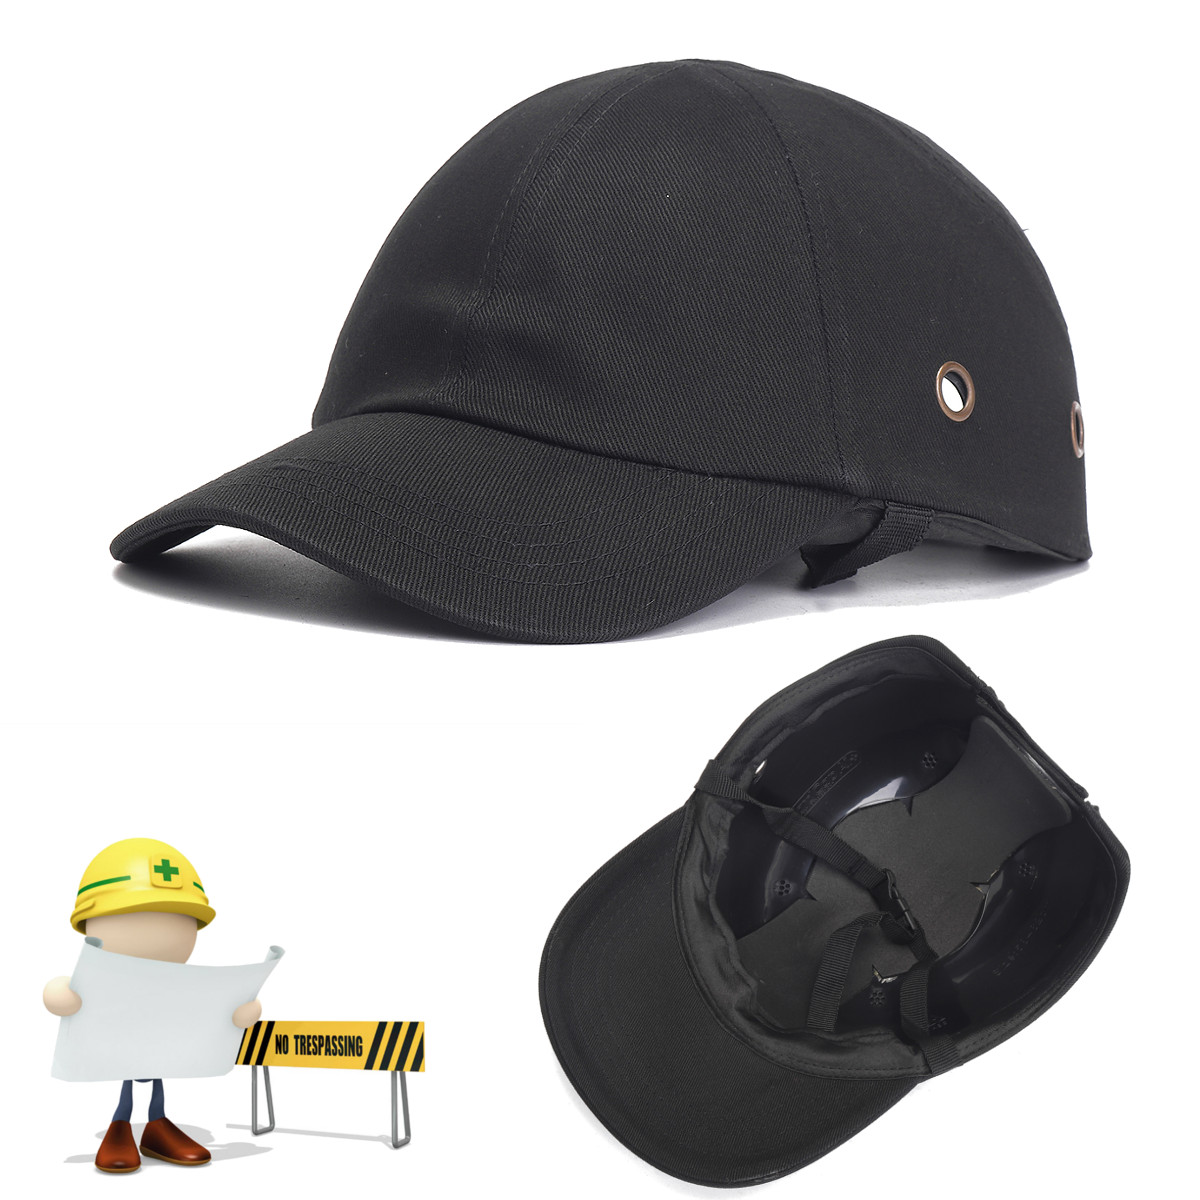 Adjustable Safety Bump Cap Lightweight and Breathable Hard Hat Head Helmet Workplace Construction Site Head Protection Cap